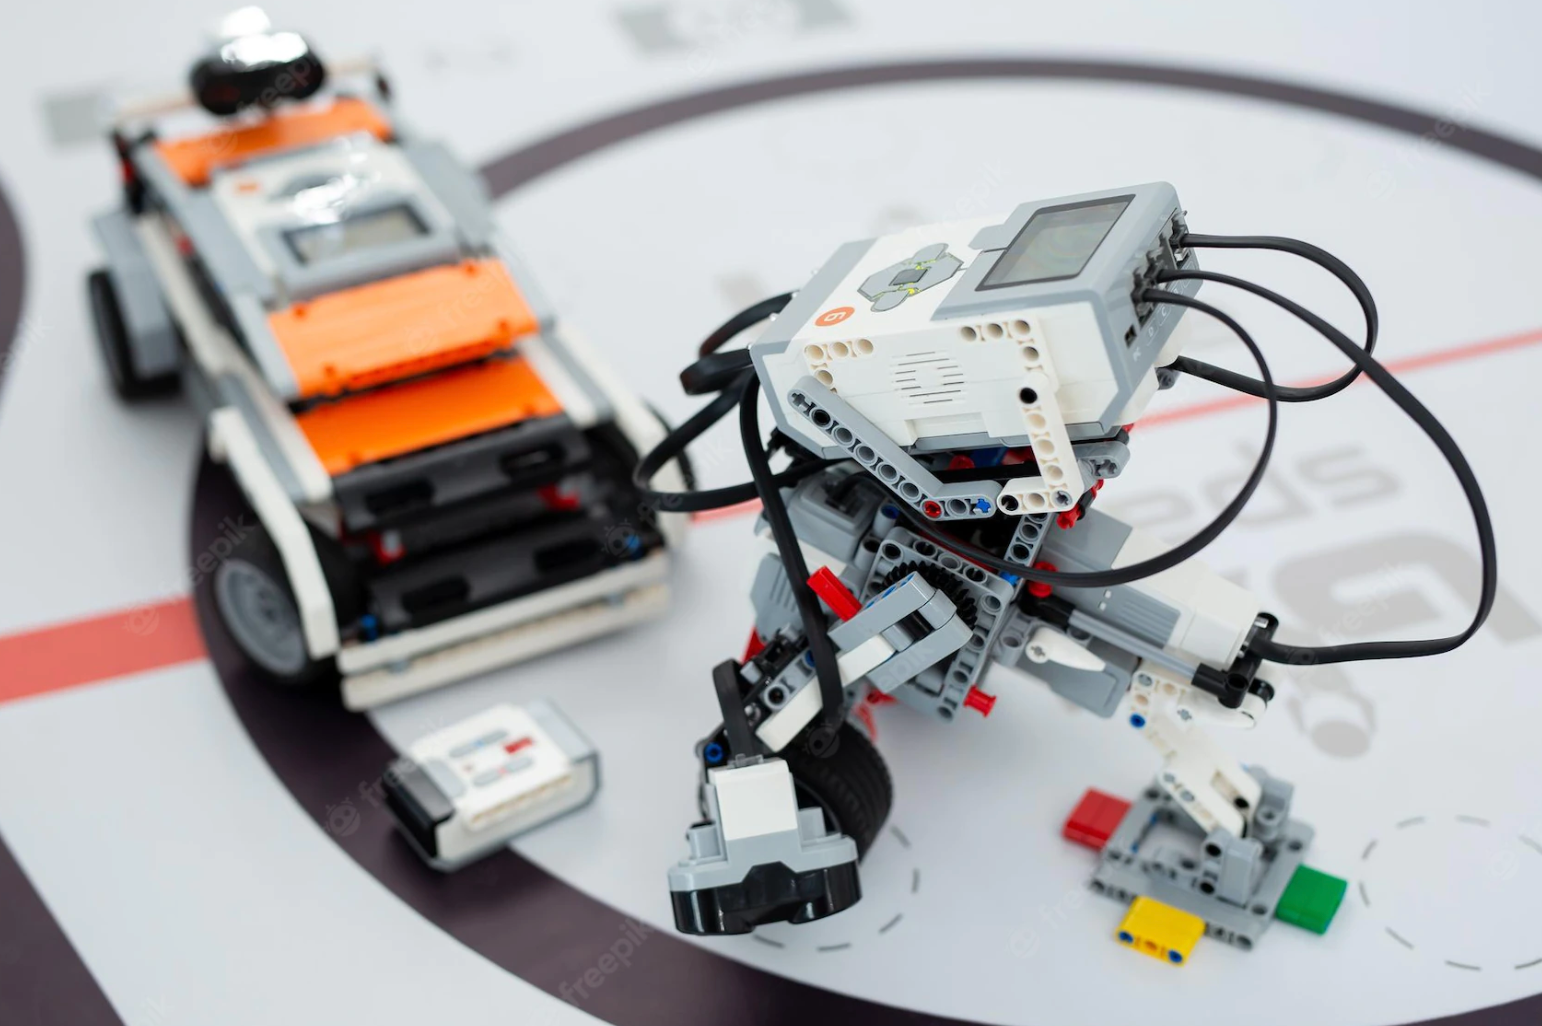 Robotic Workshop, tailored for students at 8 years old or above